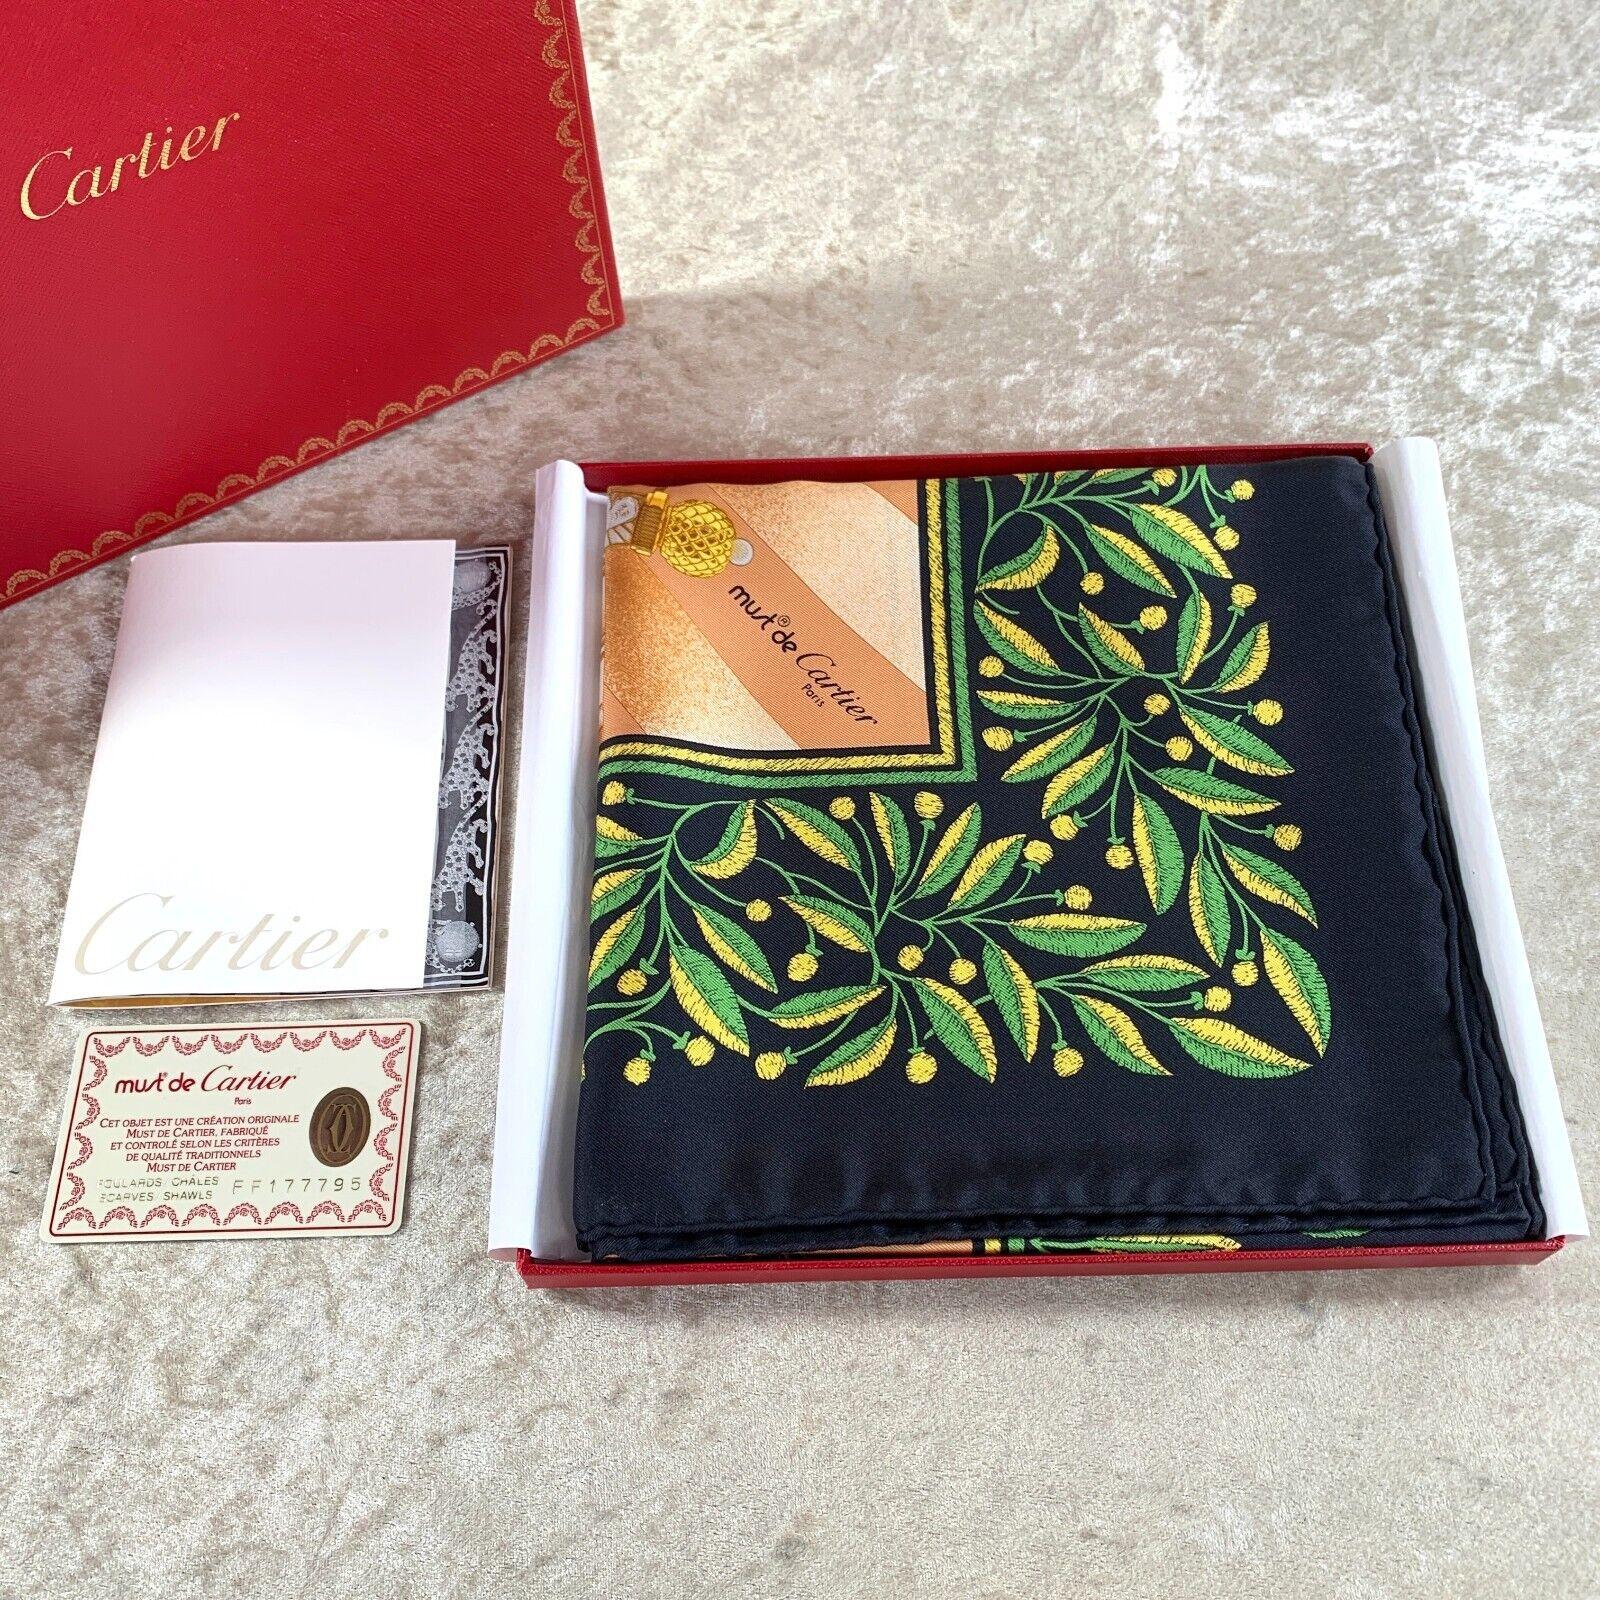 Vintage Cartier Scarf 100% Pure Silk 
Rare 
With Original Cartier Case and Cartier & Card Certificate
Circa 1995
Made in France 
100% Silk 
Pattern Institvt De France 
85/85 cm
In fantastic condition 
Not sure it was ever used
